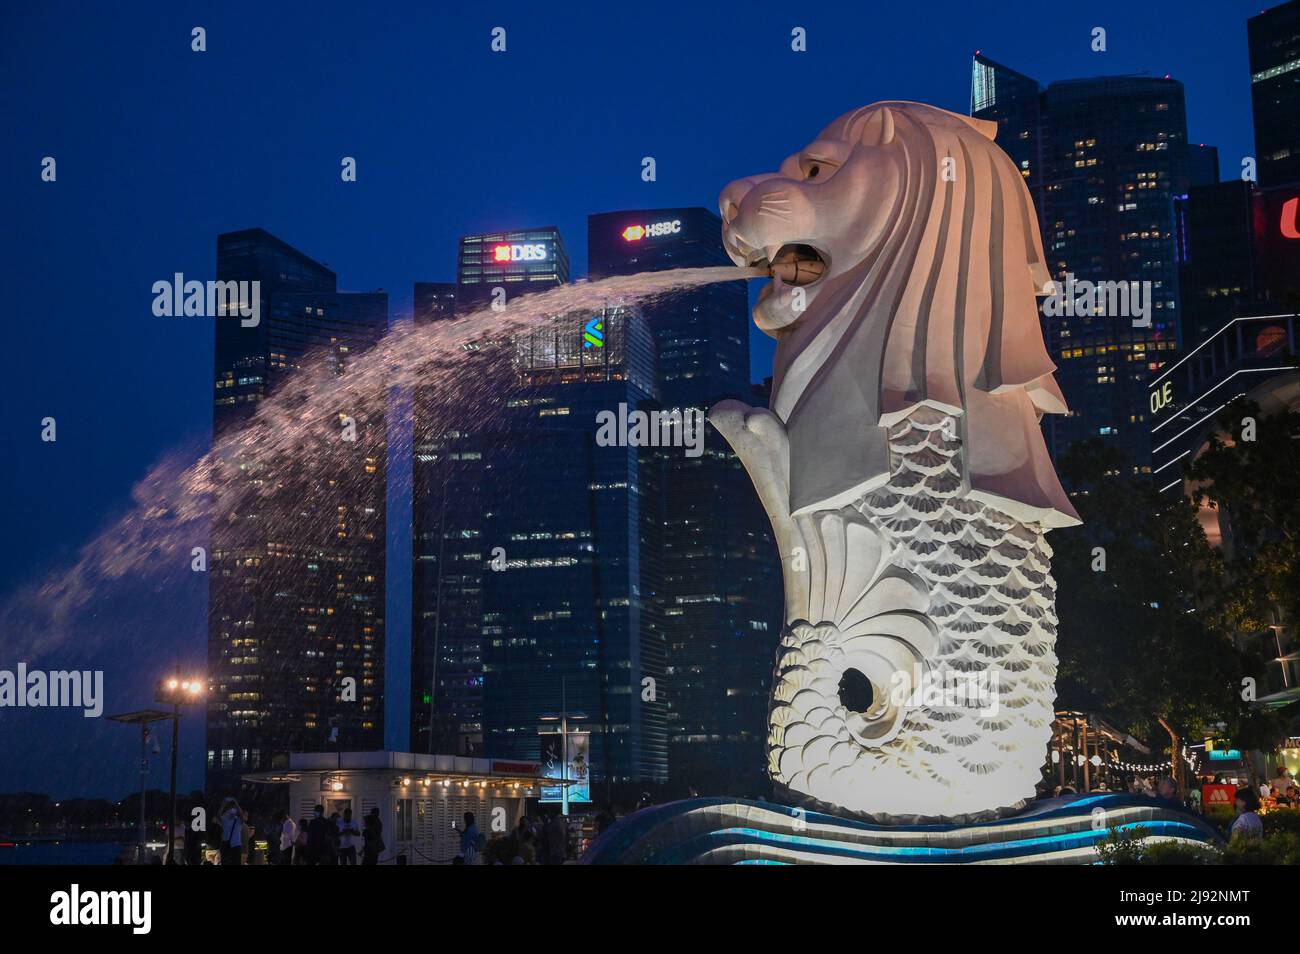 Merlion Park, a iconic statue in Singapore at Night. Merlion is a mythical creature with a lion's head and the body of a fish Stock Photo